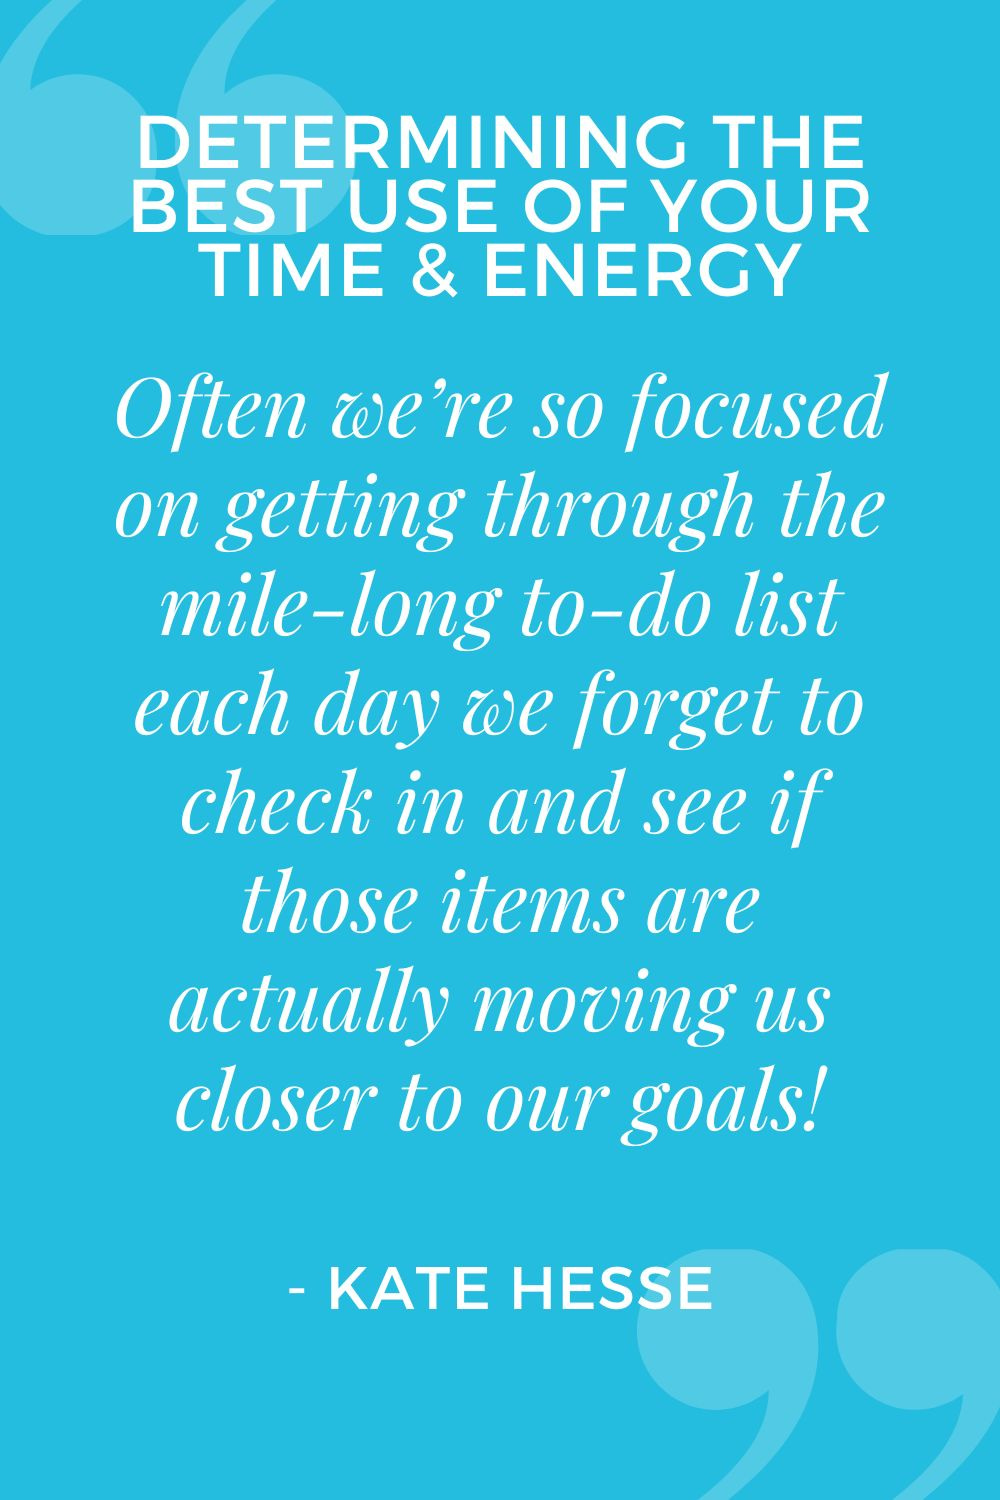 Often we're so focused on getting through the mile-long to-do list each day we forget to check in and see if those items are actually moving us closer to our goals!